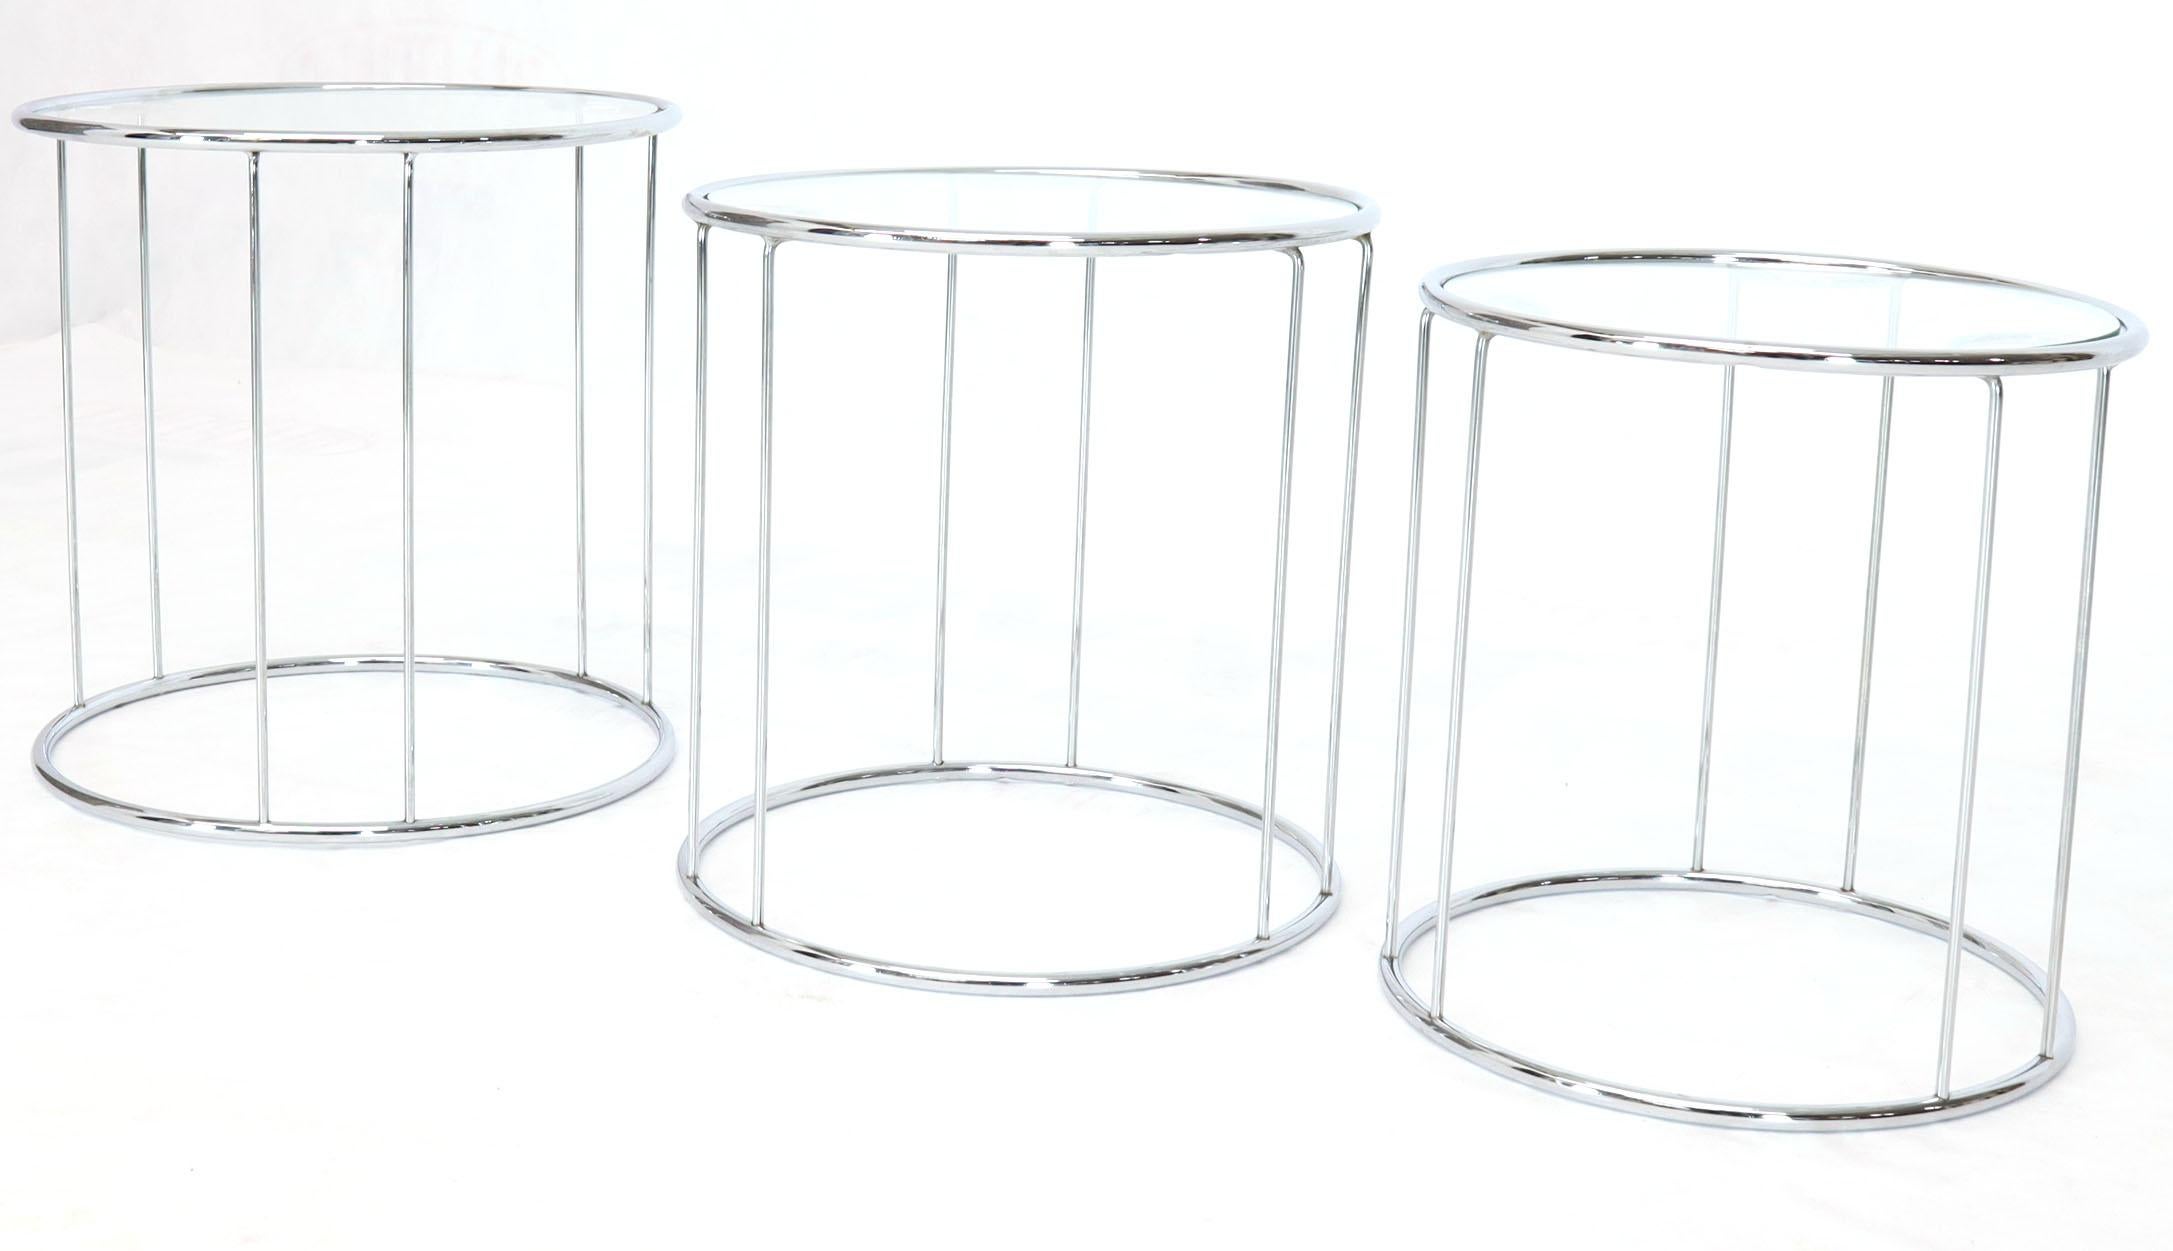 20th Century Pair of Round Chrome and Glass Nesting Side End Table 6 Pieces Set For Sale